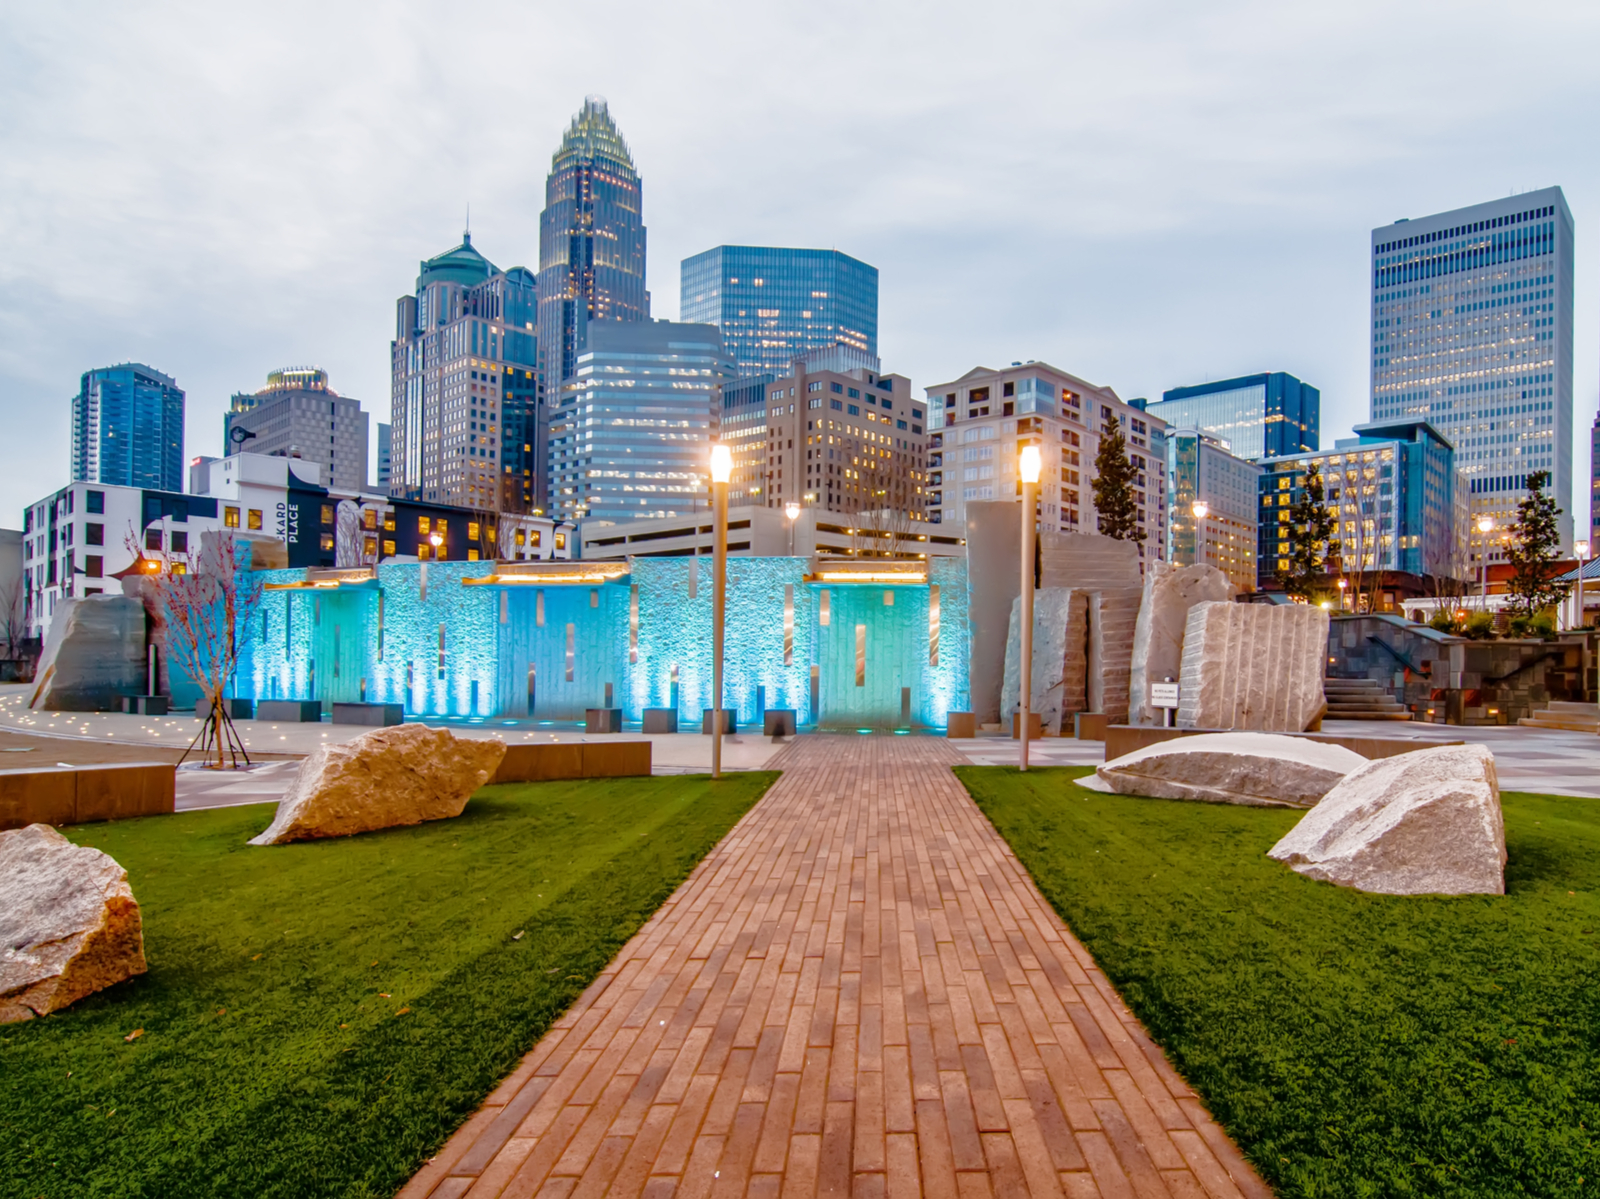 Park with a lighted fountain sculpture in Charlotte, one of the best places to visit in North Carolina